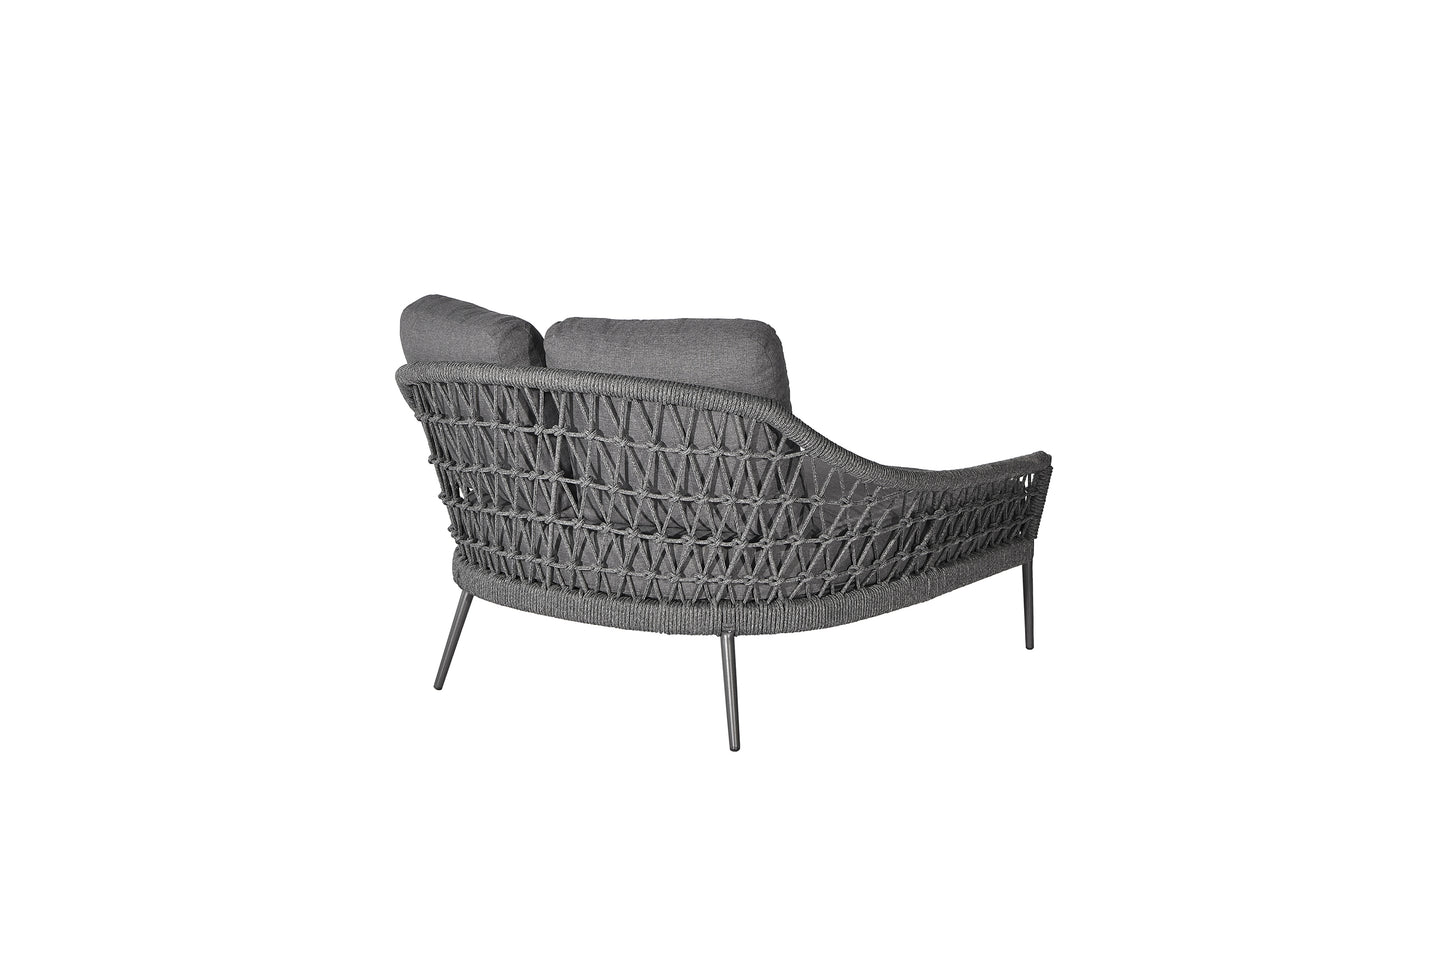 CAMASTRO MARRA DAYBED CHARCOAL